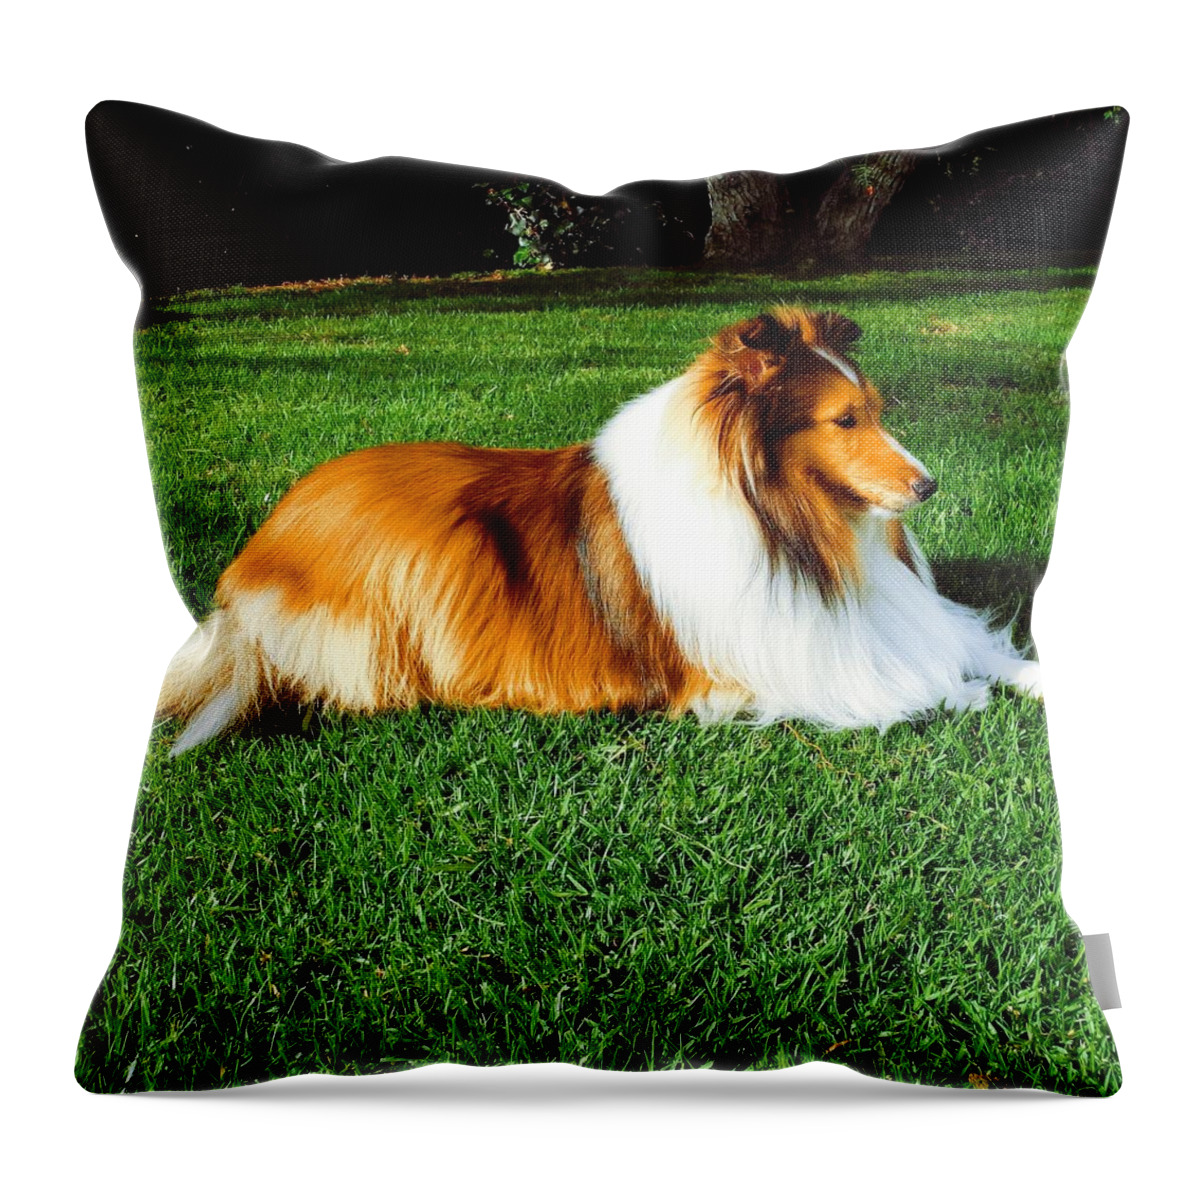 Sheltie Throw Pillow featuring the photograph Sheltie Resting on a Lawn by Robert Ceccon